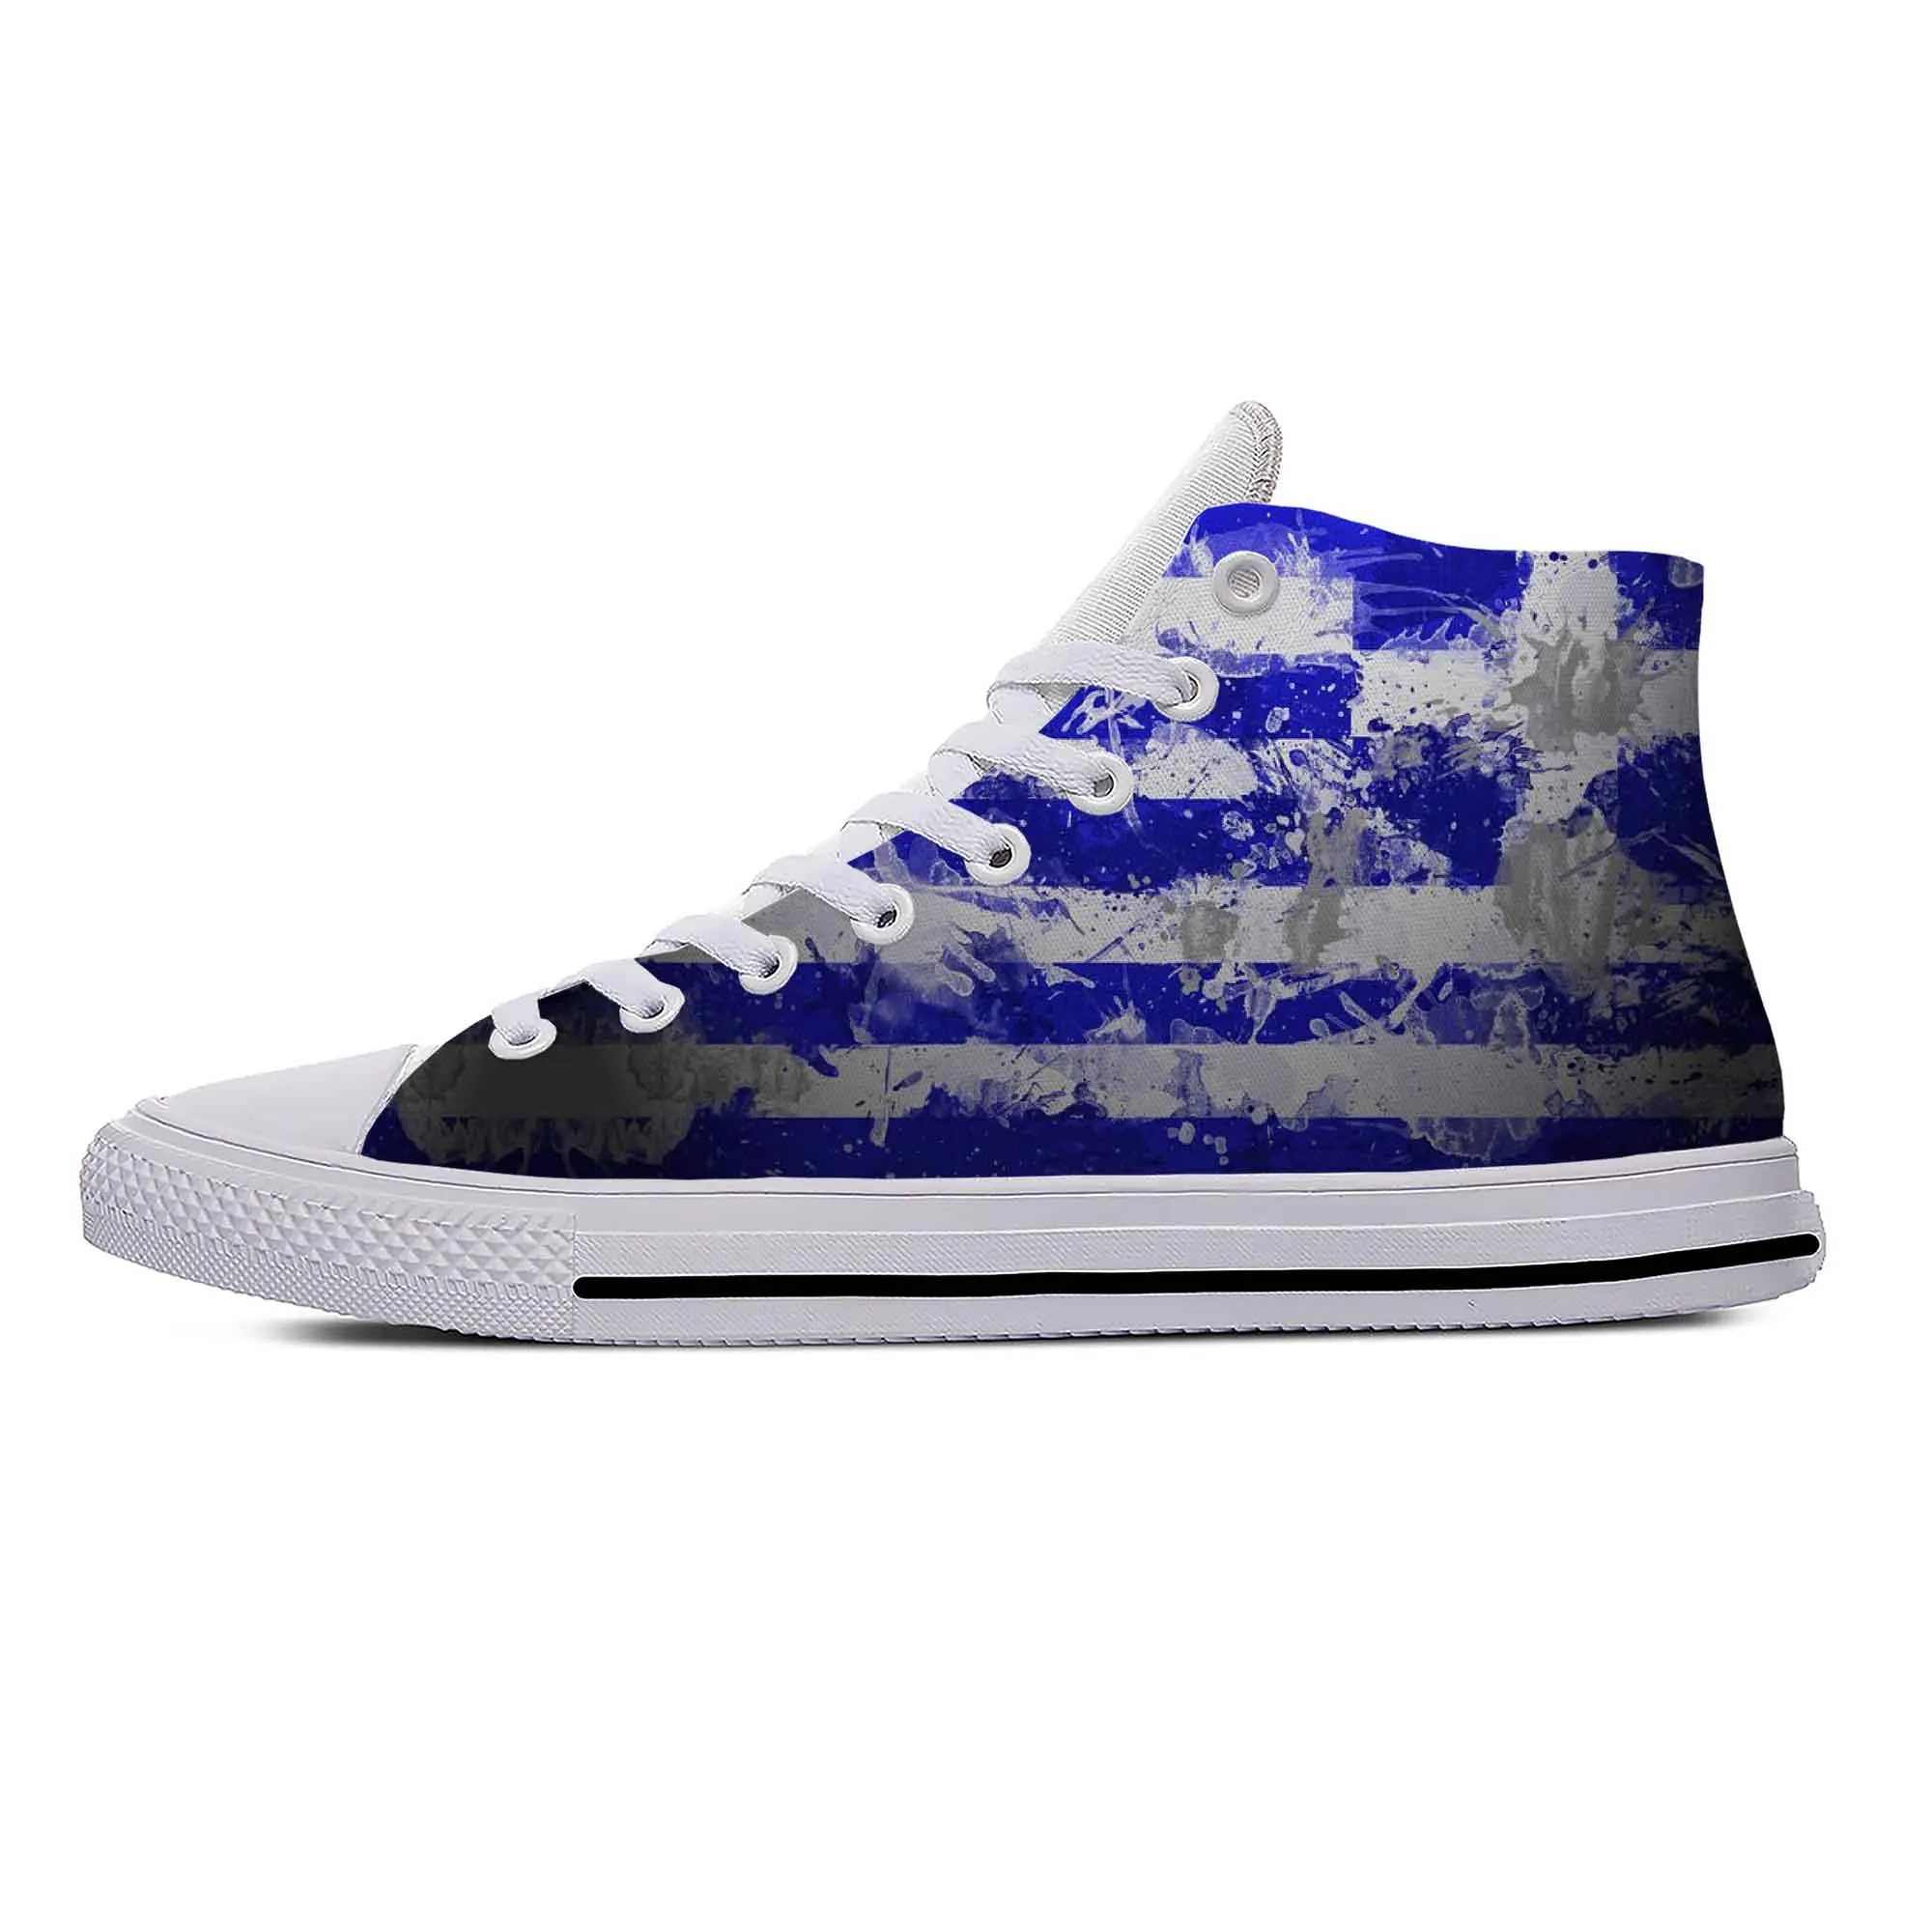 

Hellenic Greek Greece Flag Patriotic Cool Fashion Casual Cloth Shoes High Top Lightweight Breathable 3D Print Men Women Sneakers